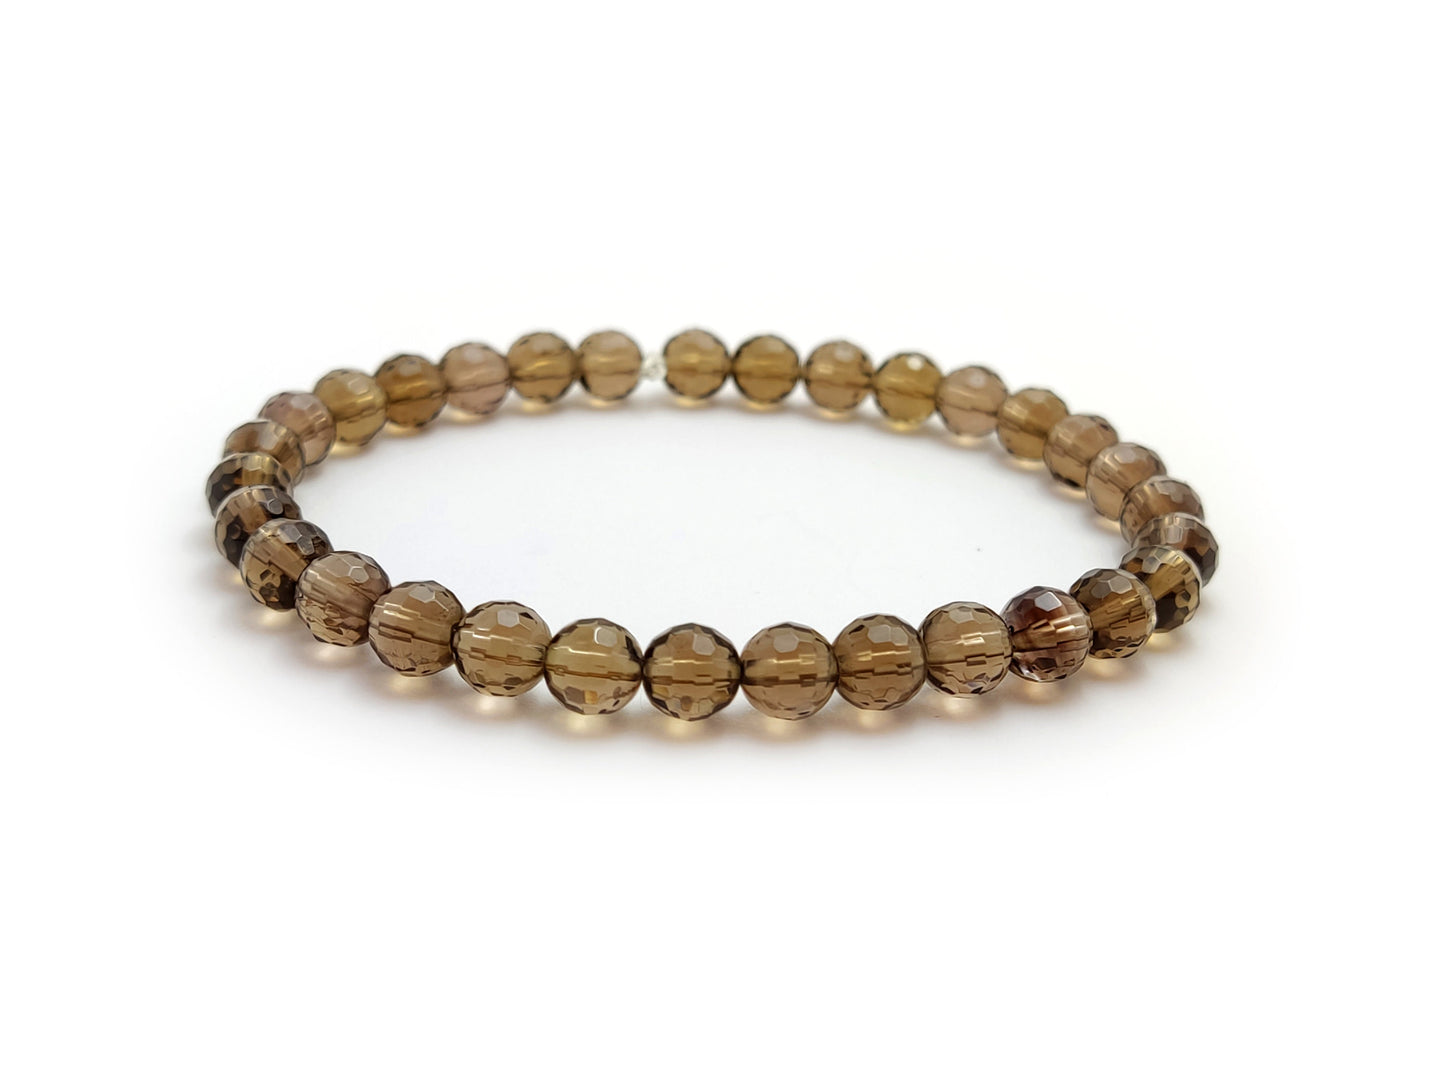 Smoked Brown Round Faceted Natural Quartz Stones Bracelet 6mm, Dark Brown Quartz Bracelet, Quartz Jewelry, Brown Quartz Stones 6 mm Bracelet